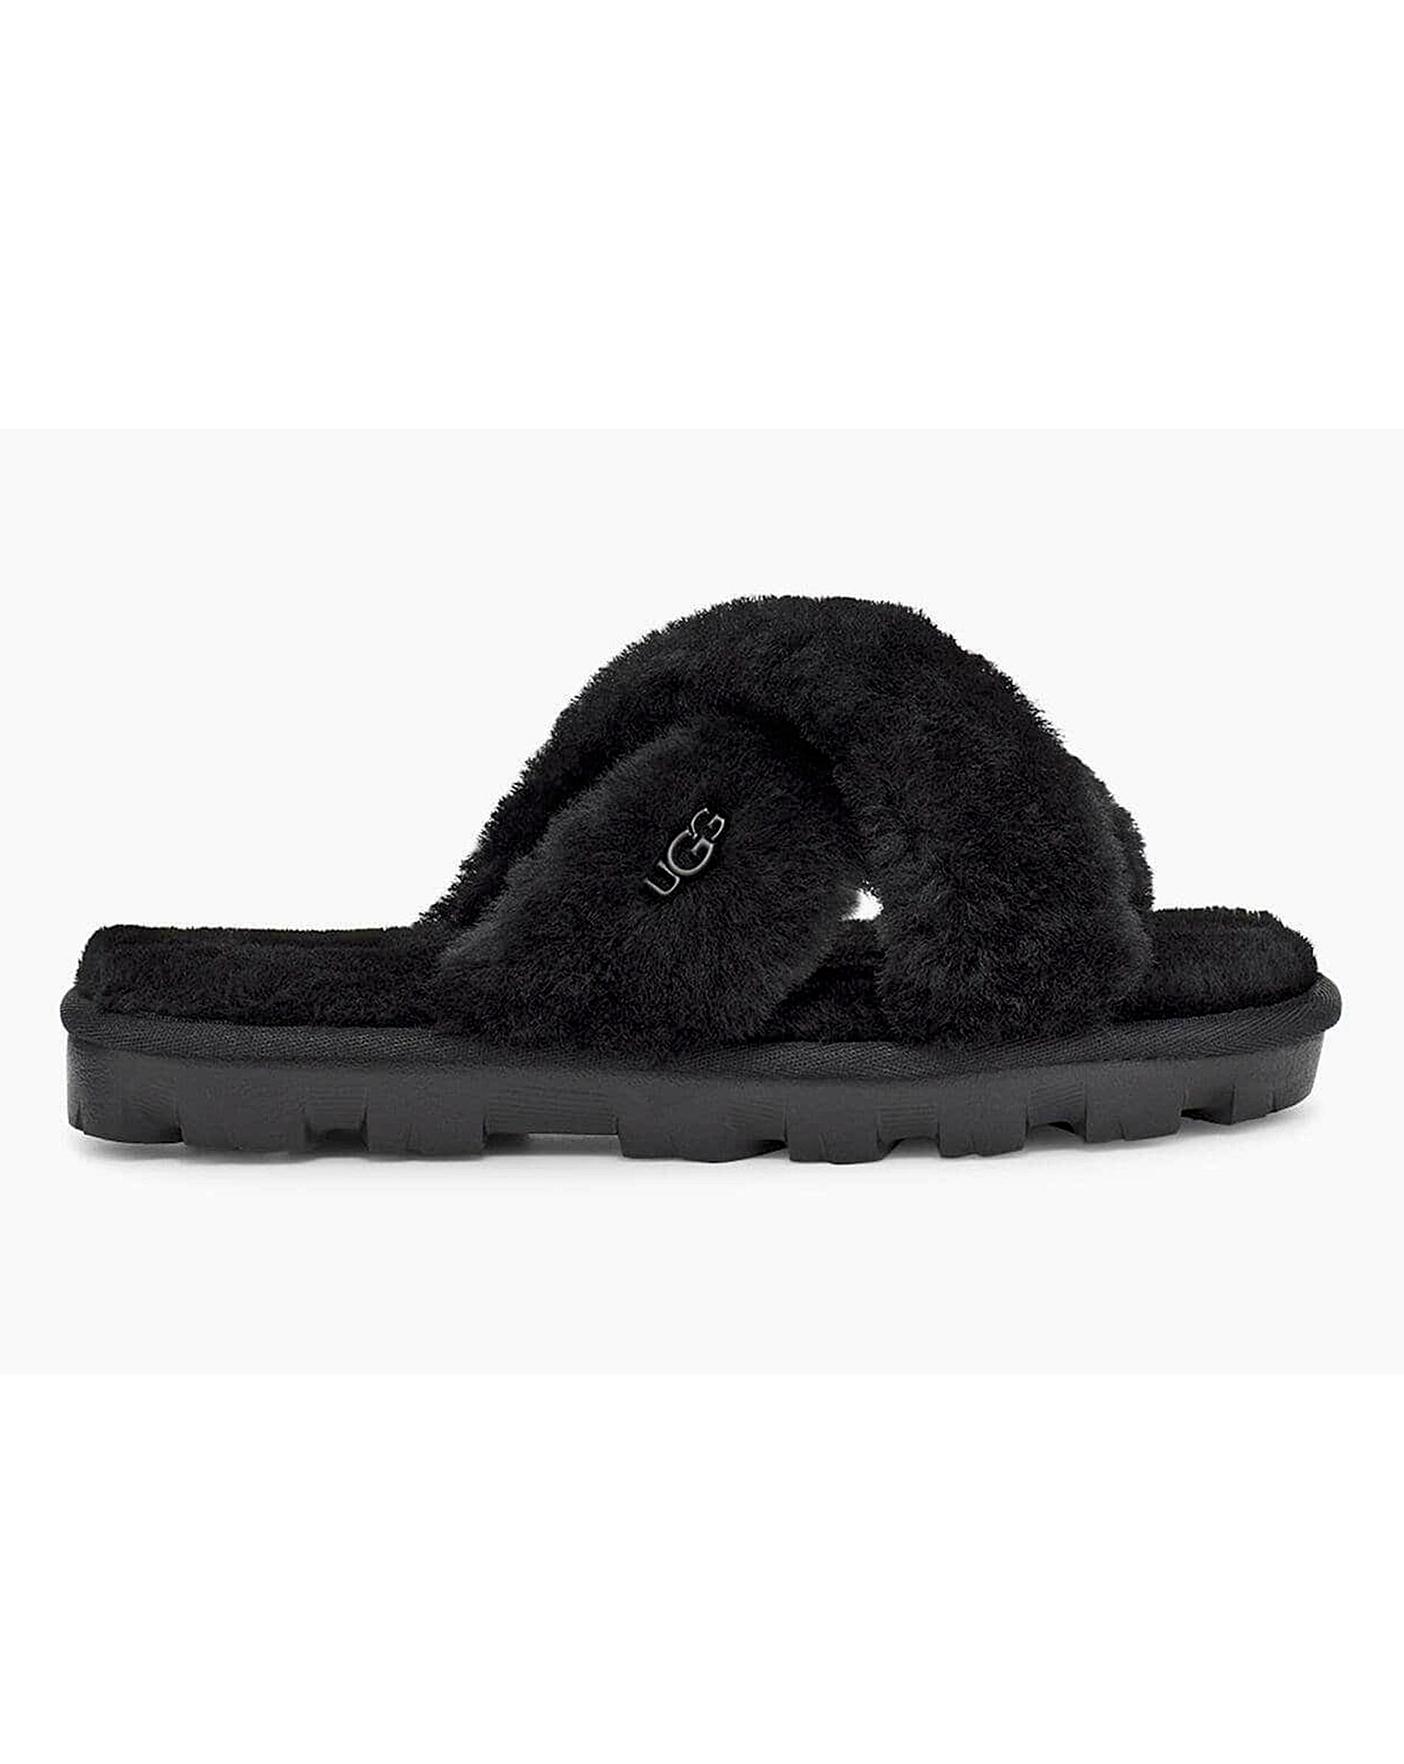 ugg slippers fit